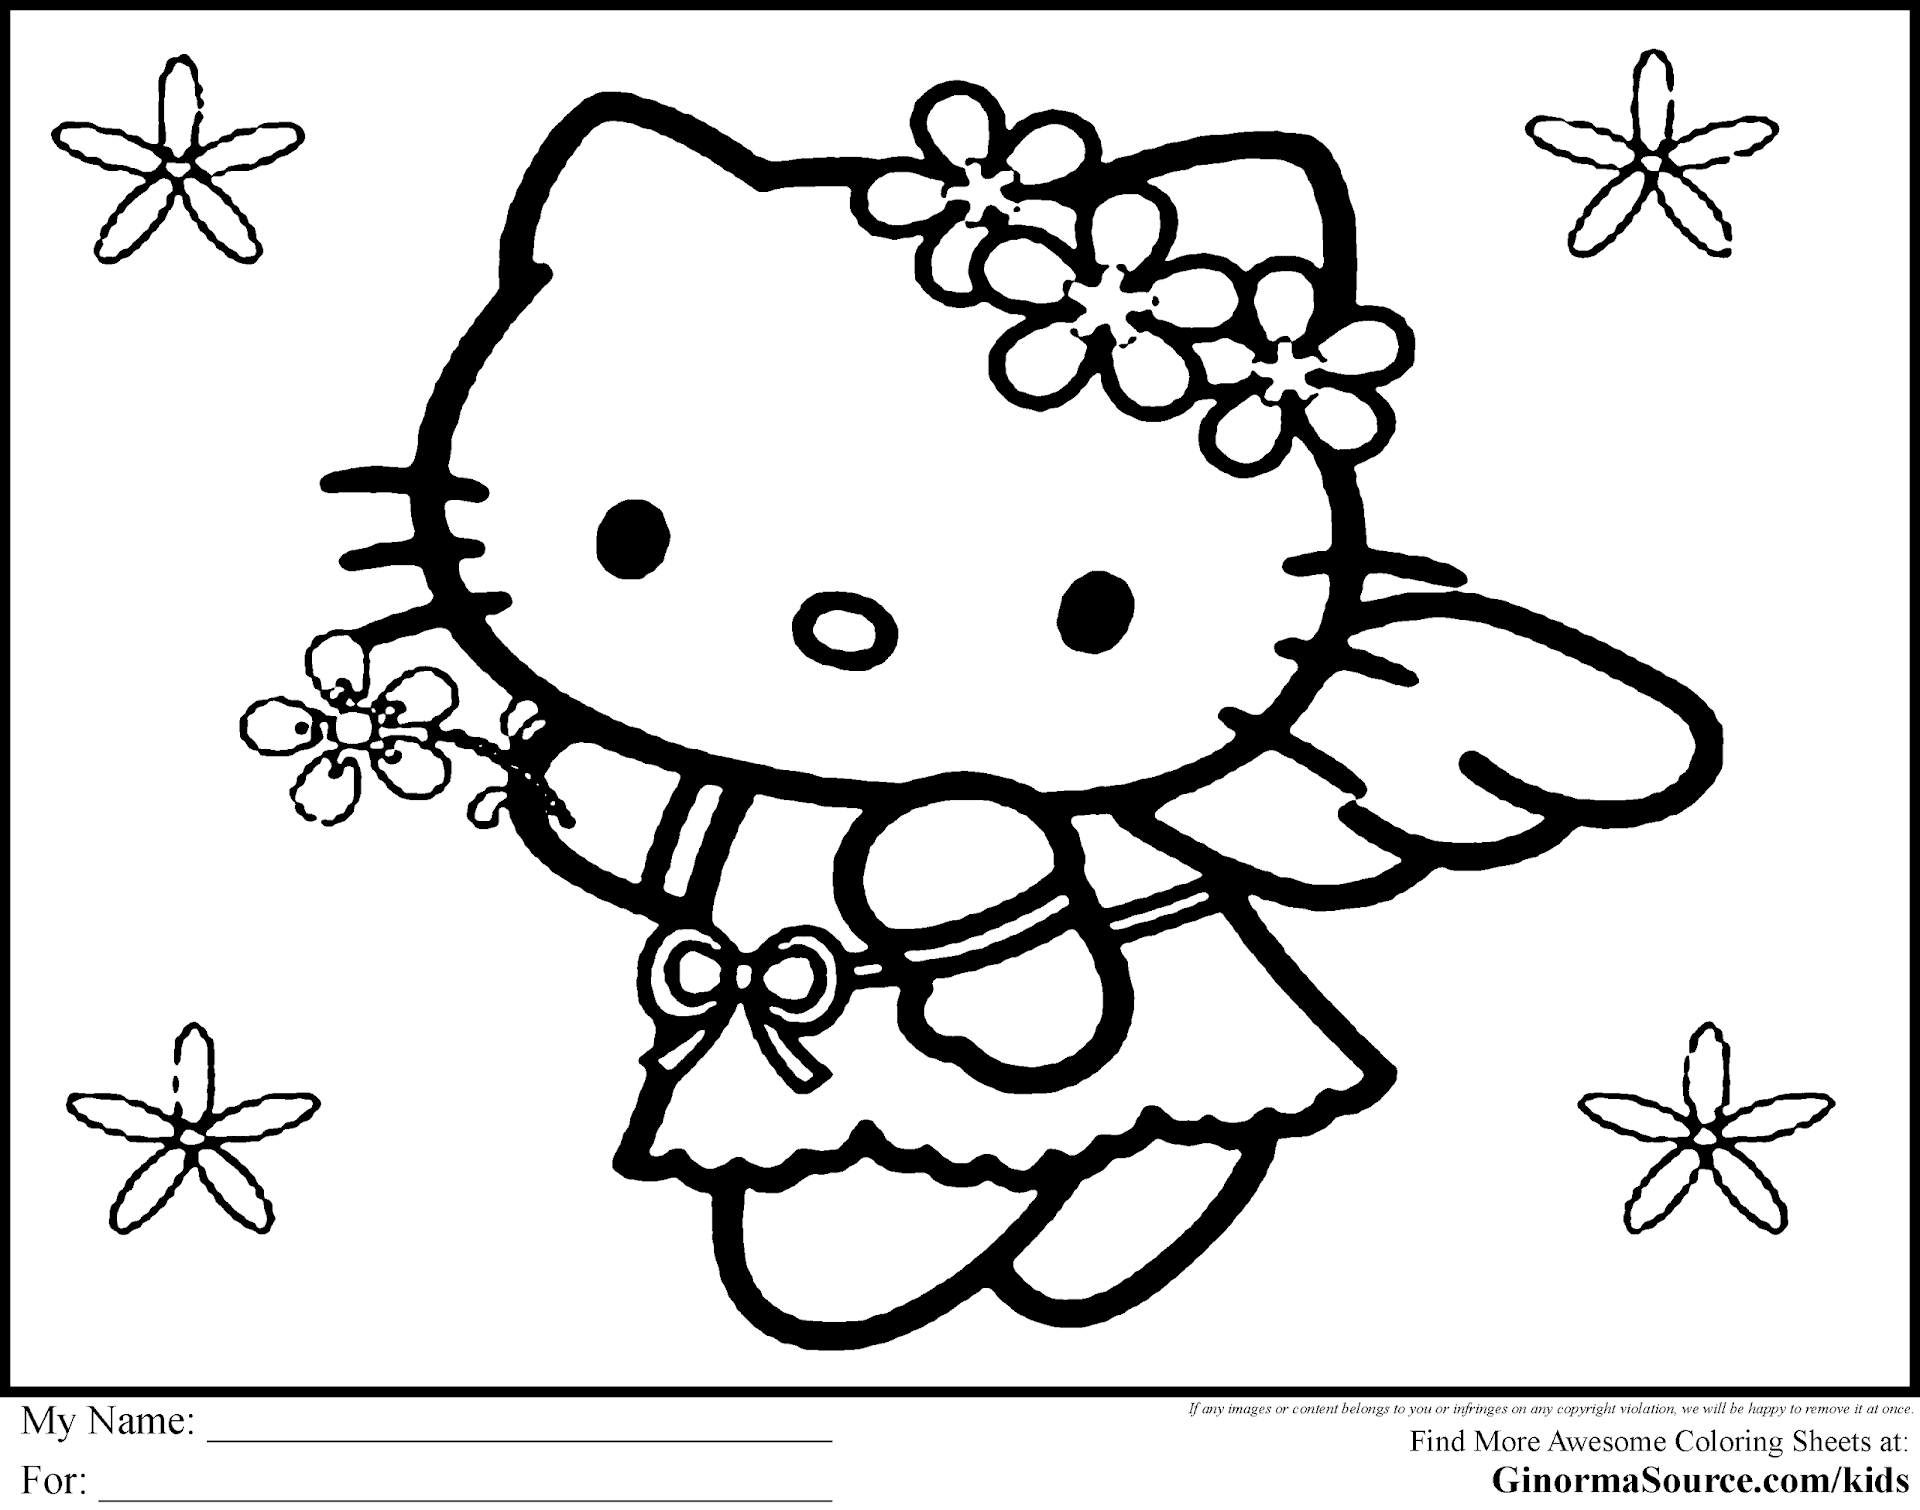 Download HD Hello Kitty And Friends Coloring Pages Images - Free ...